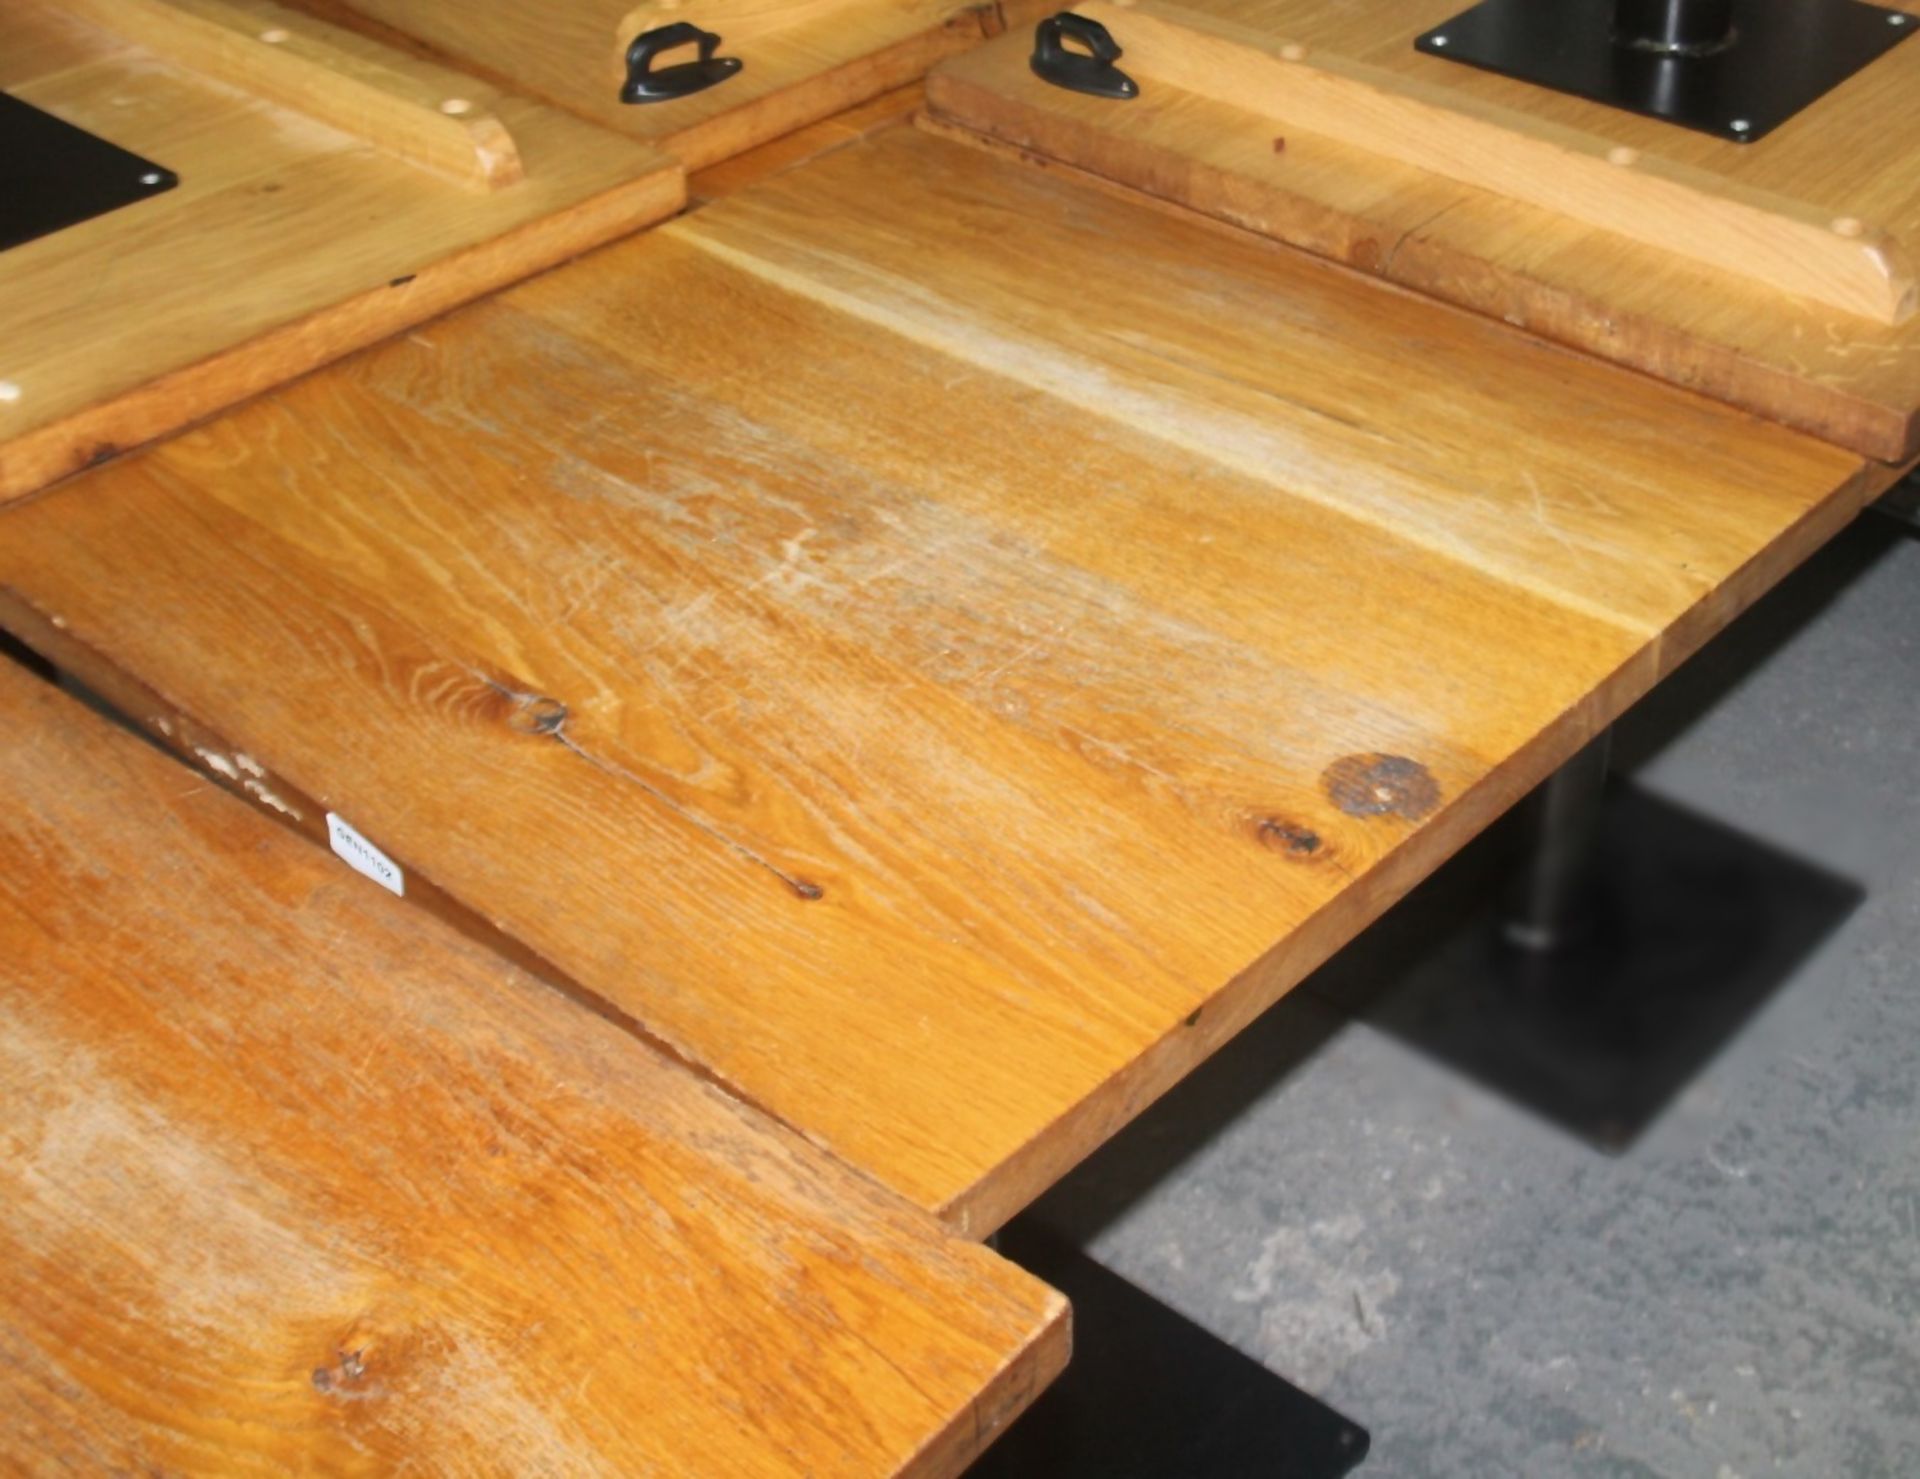 4 x Solid Oak Restaurant Dining Tables - Natural Rustic Knotty Oak Tops With Black Cast Iron Bases - Image 2 of 4